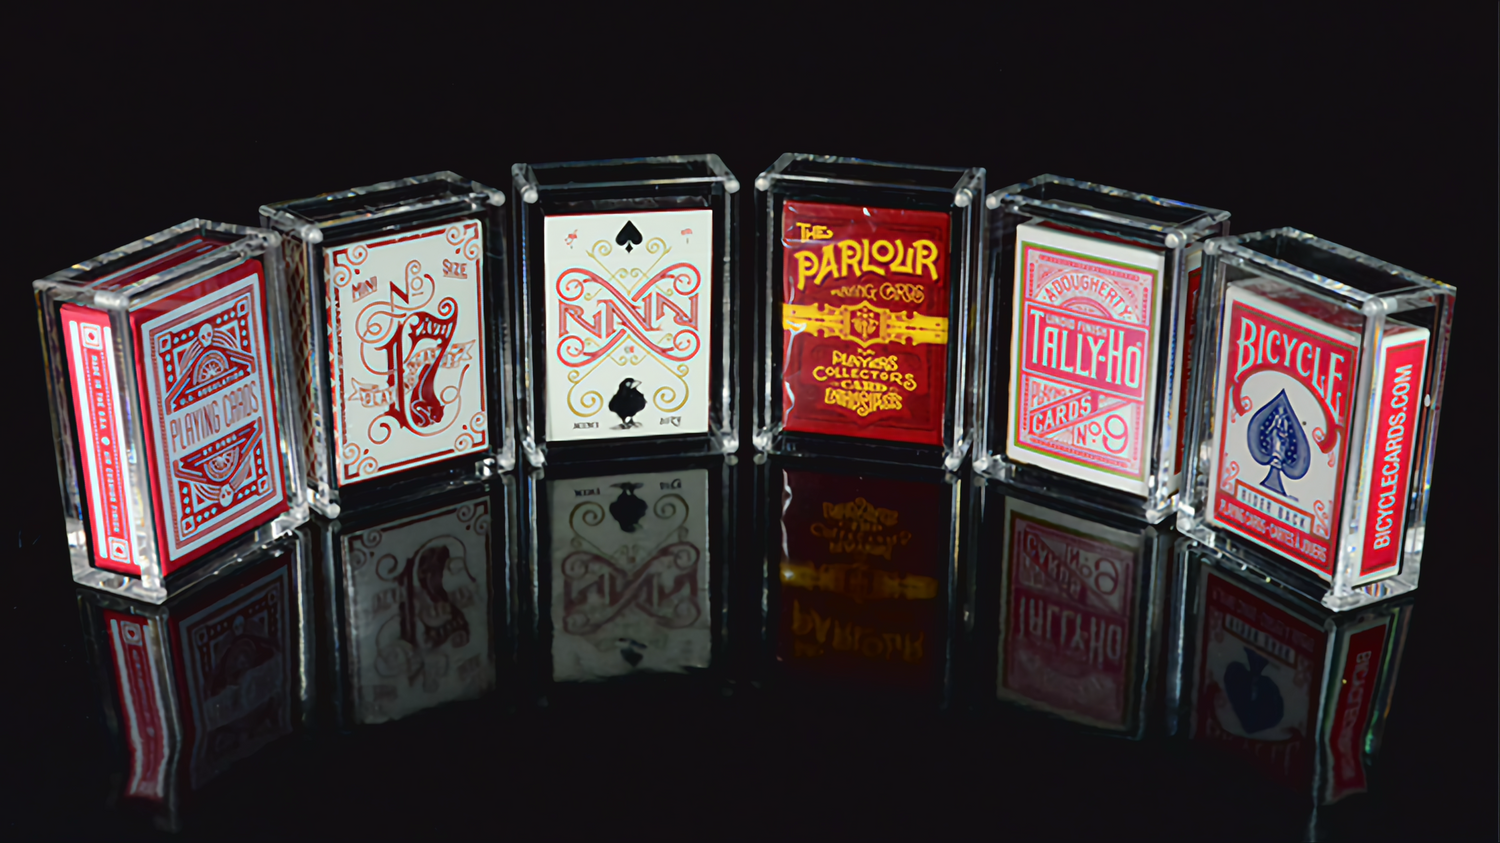 Carat X1M Mini Deck Case by Carat Case Creations : Playing Cards, Poker, Magic, Cardistry, Singapore